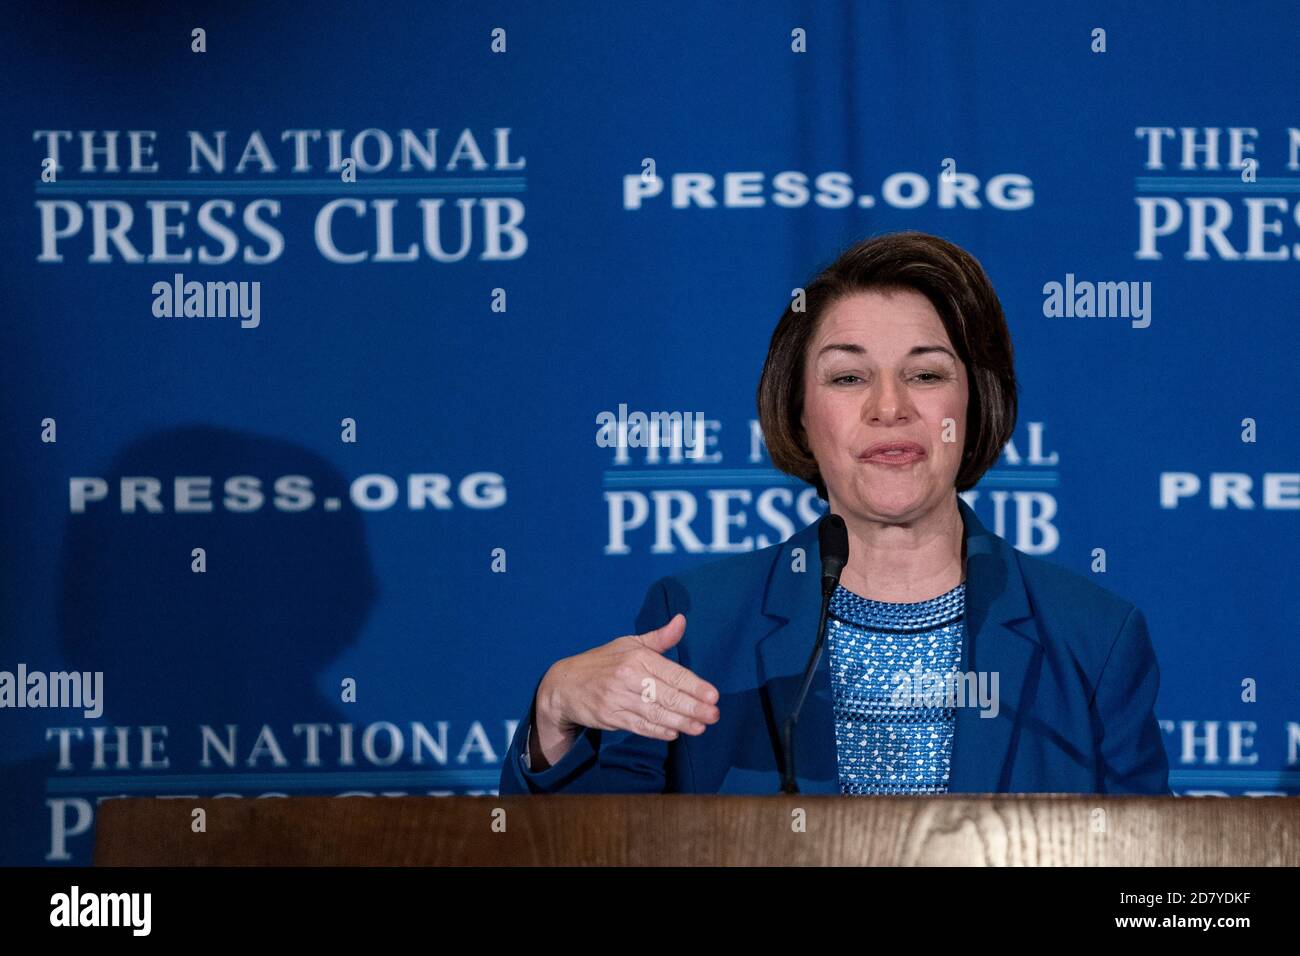 Senator Amy Klobuchar, a Democrat from Minnesota and 2020 presidential candidate, speaks at the National Press Club on Tuesday, July 16, 2019 in Washington, D.C. Klobuchar delivered a speech outlining her priorities for her first 100 days in office if elected President. Credit: Alex Edelman/The Photo Access Stock Photo